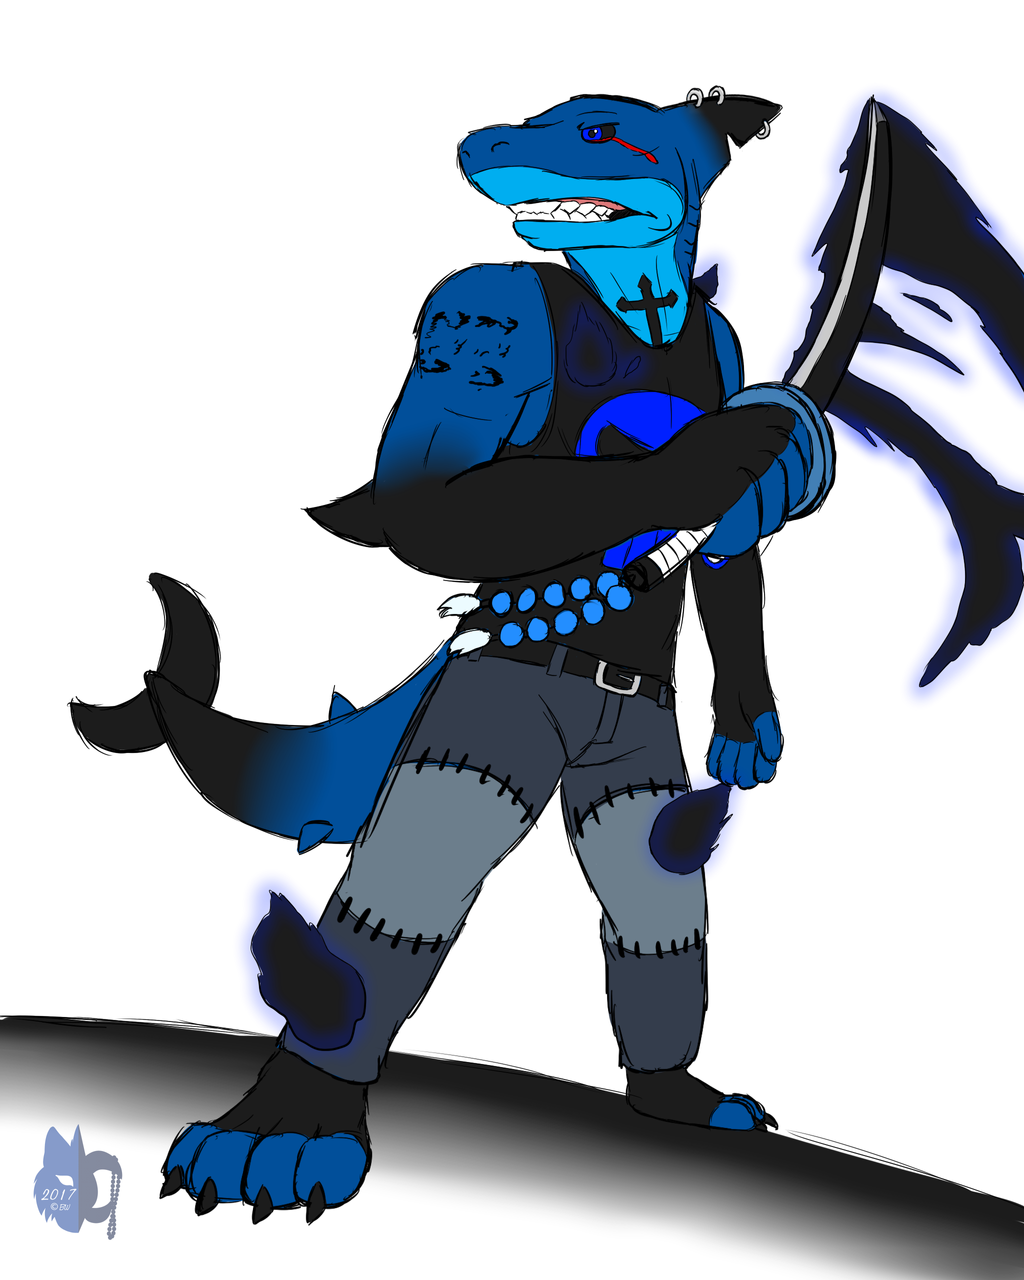 The Demon Shark is Coming by Bleuxwolf on DeviantArt.